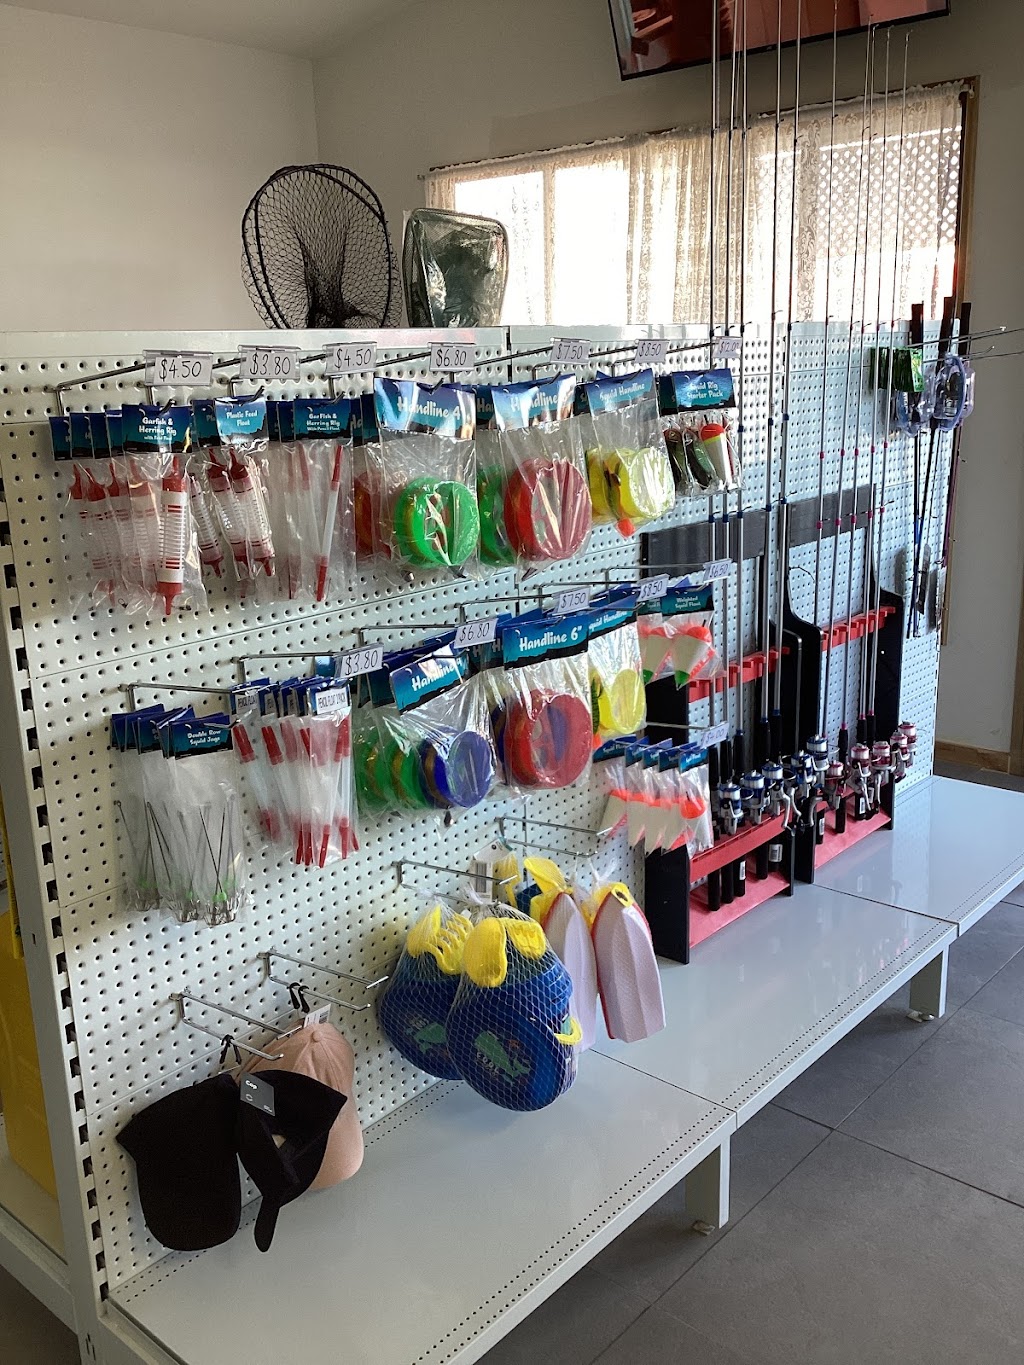 Port Wakefield Bait, Tackle and Camping | store | 4 Catherine St, Port Wakefield SA 5550, Australia | 0418800952 OR +61 418 800 952